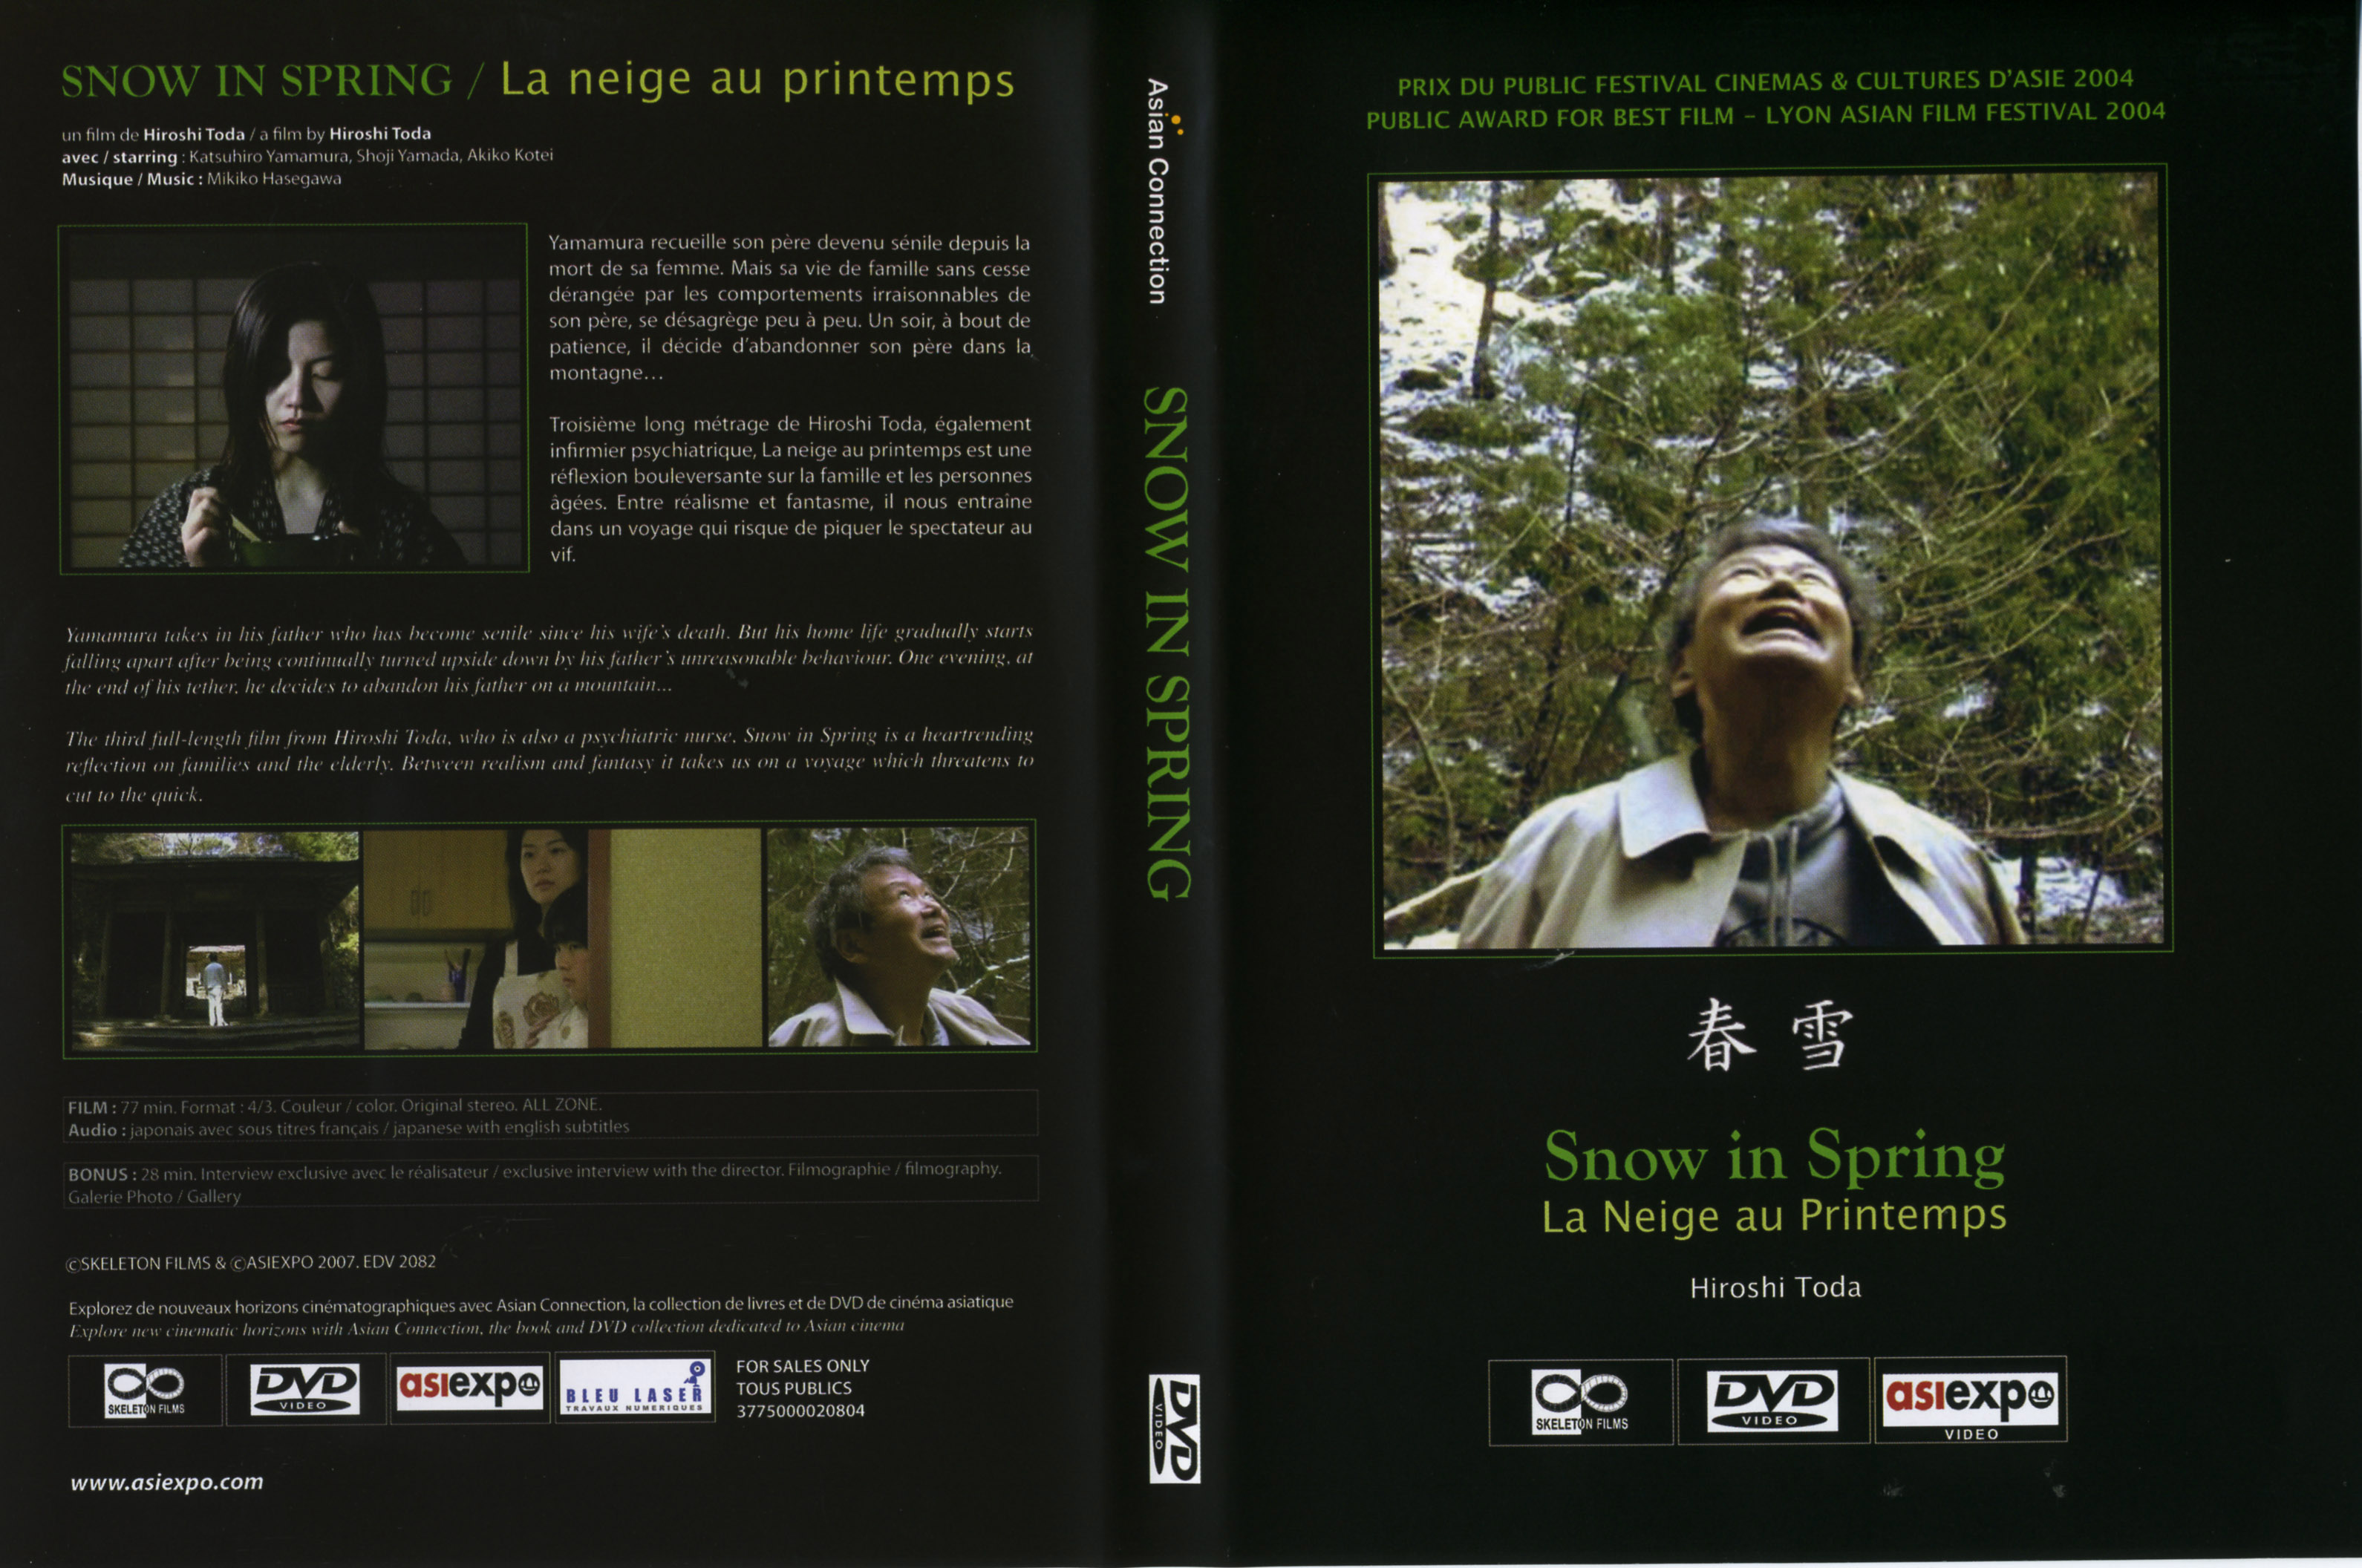 Jaquette DVD Snow in spring